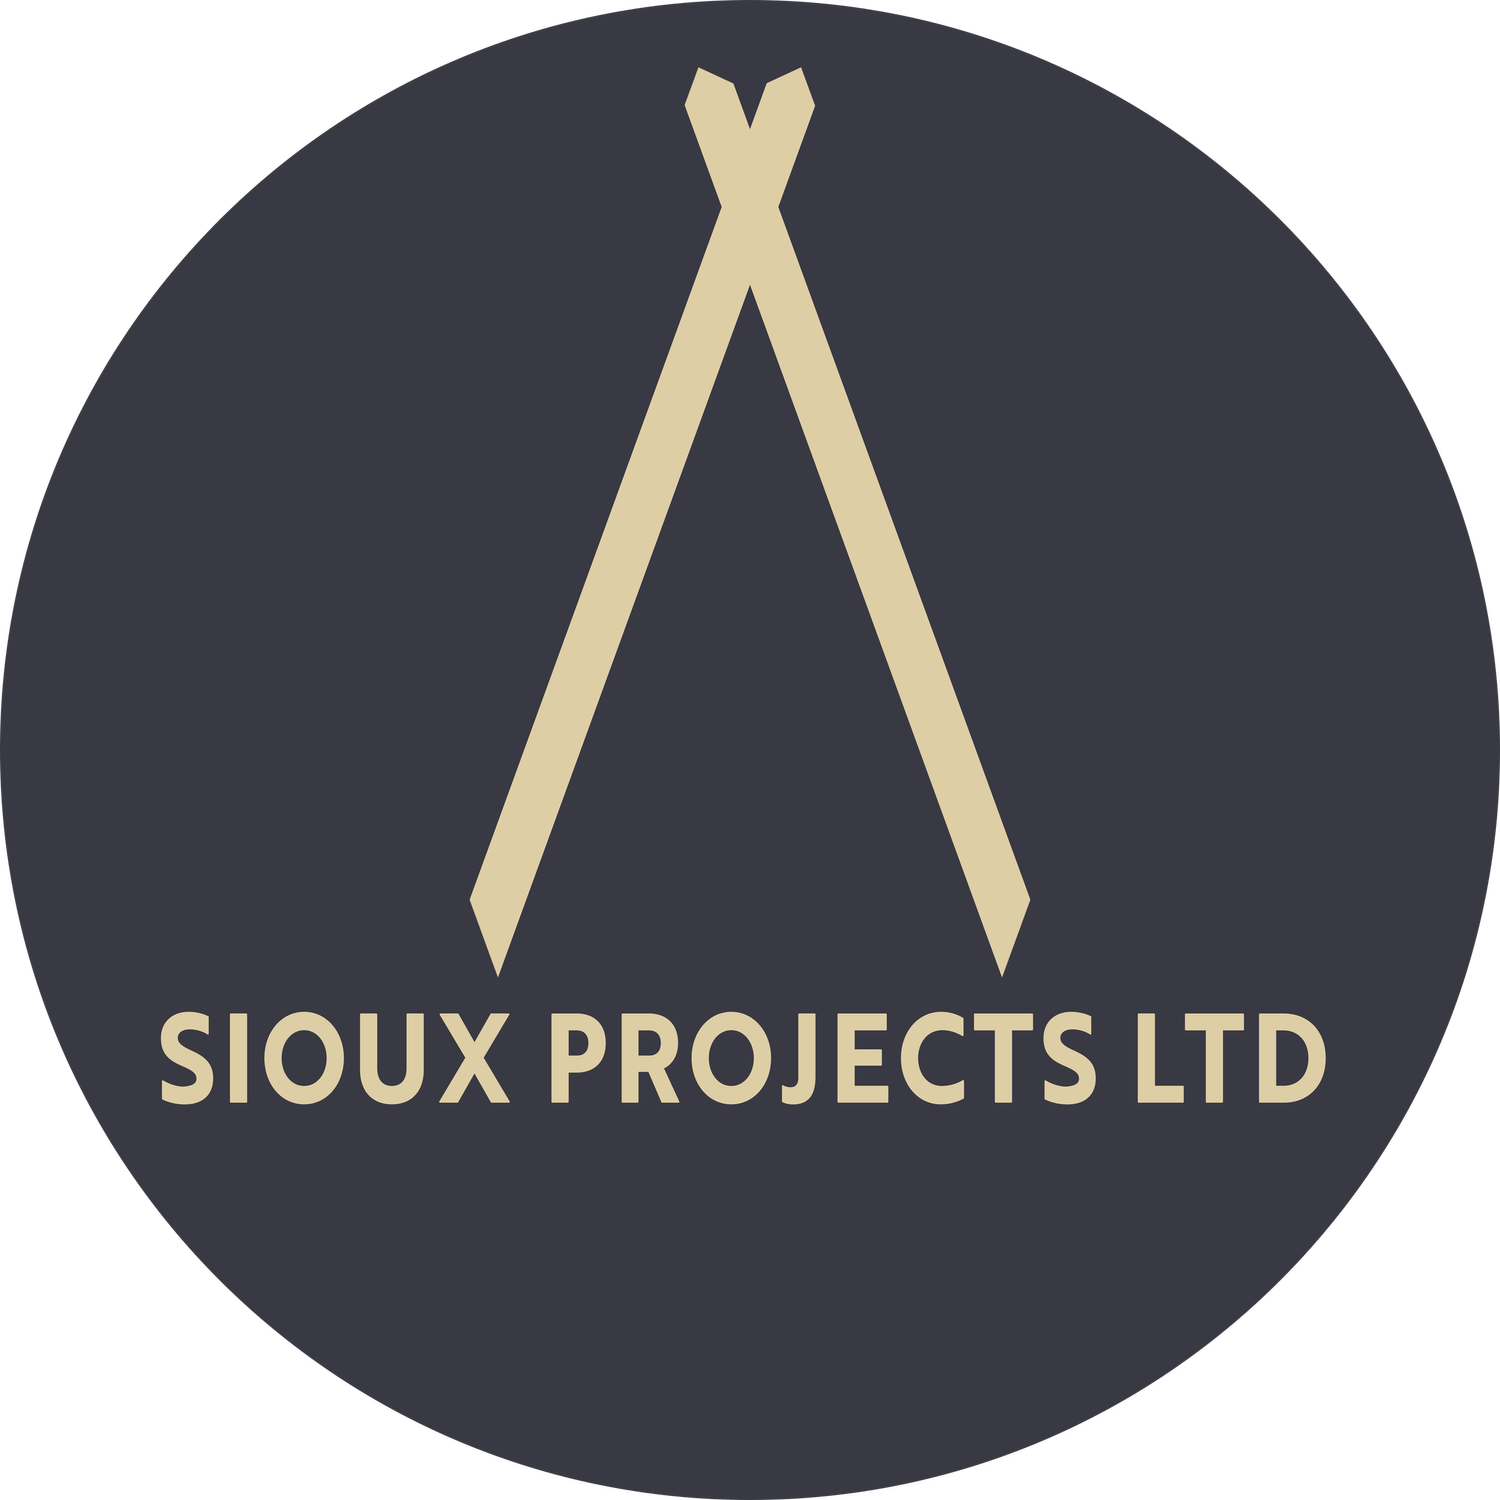 Sioux Projects LTD